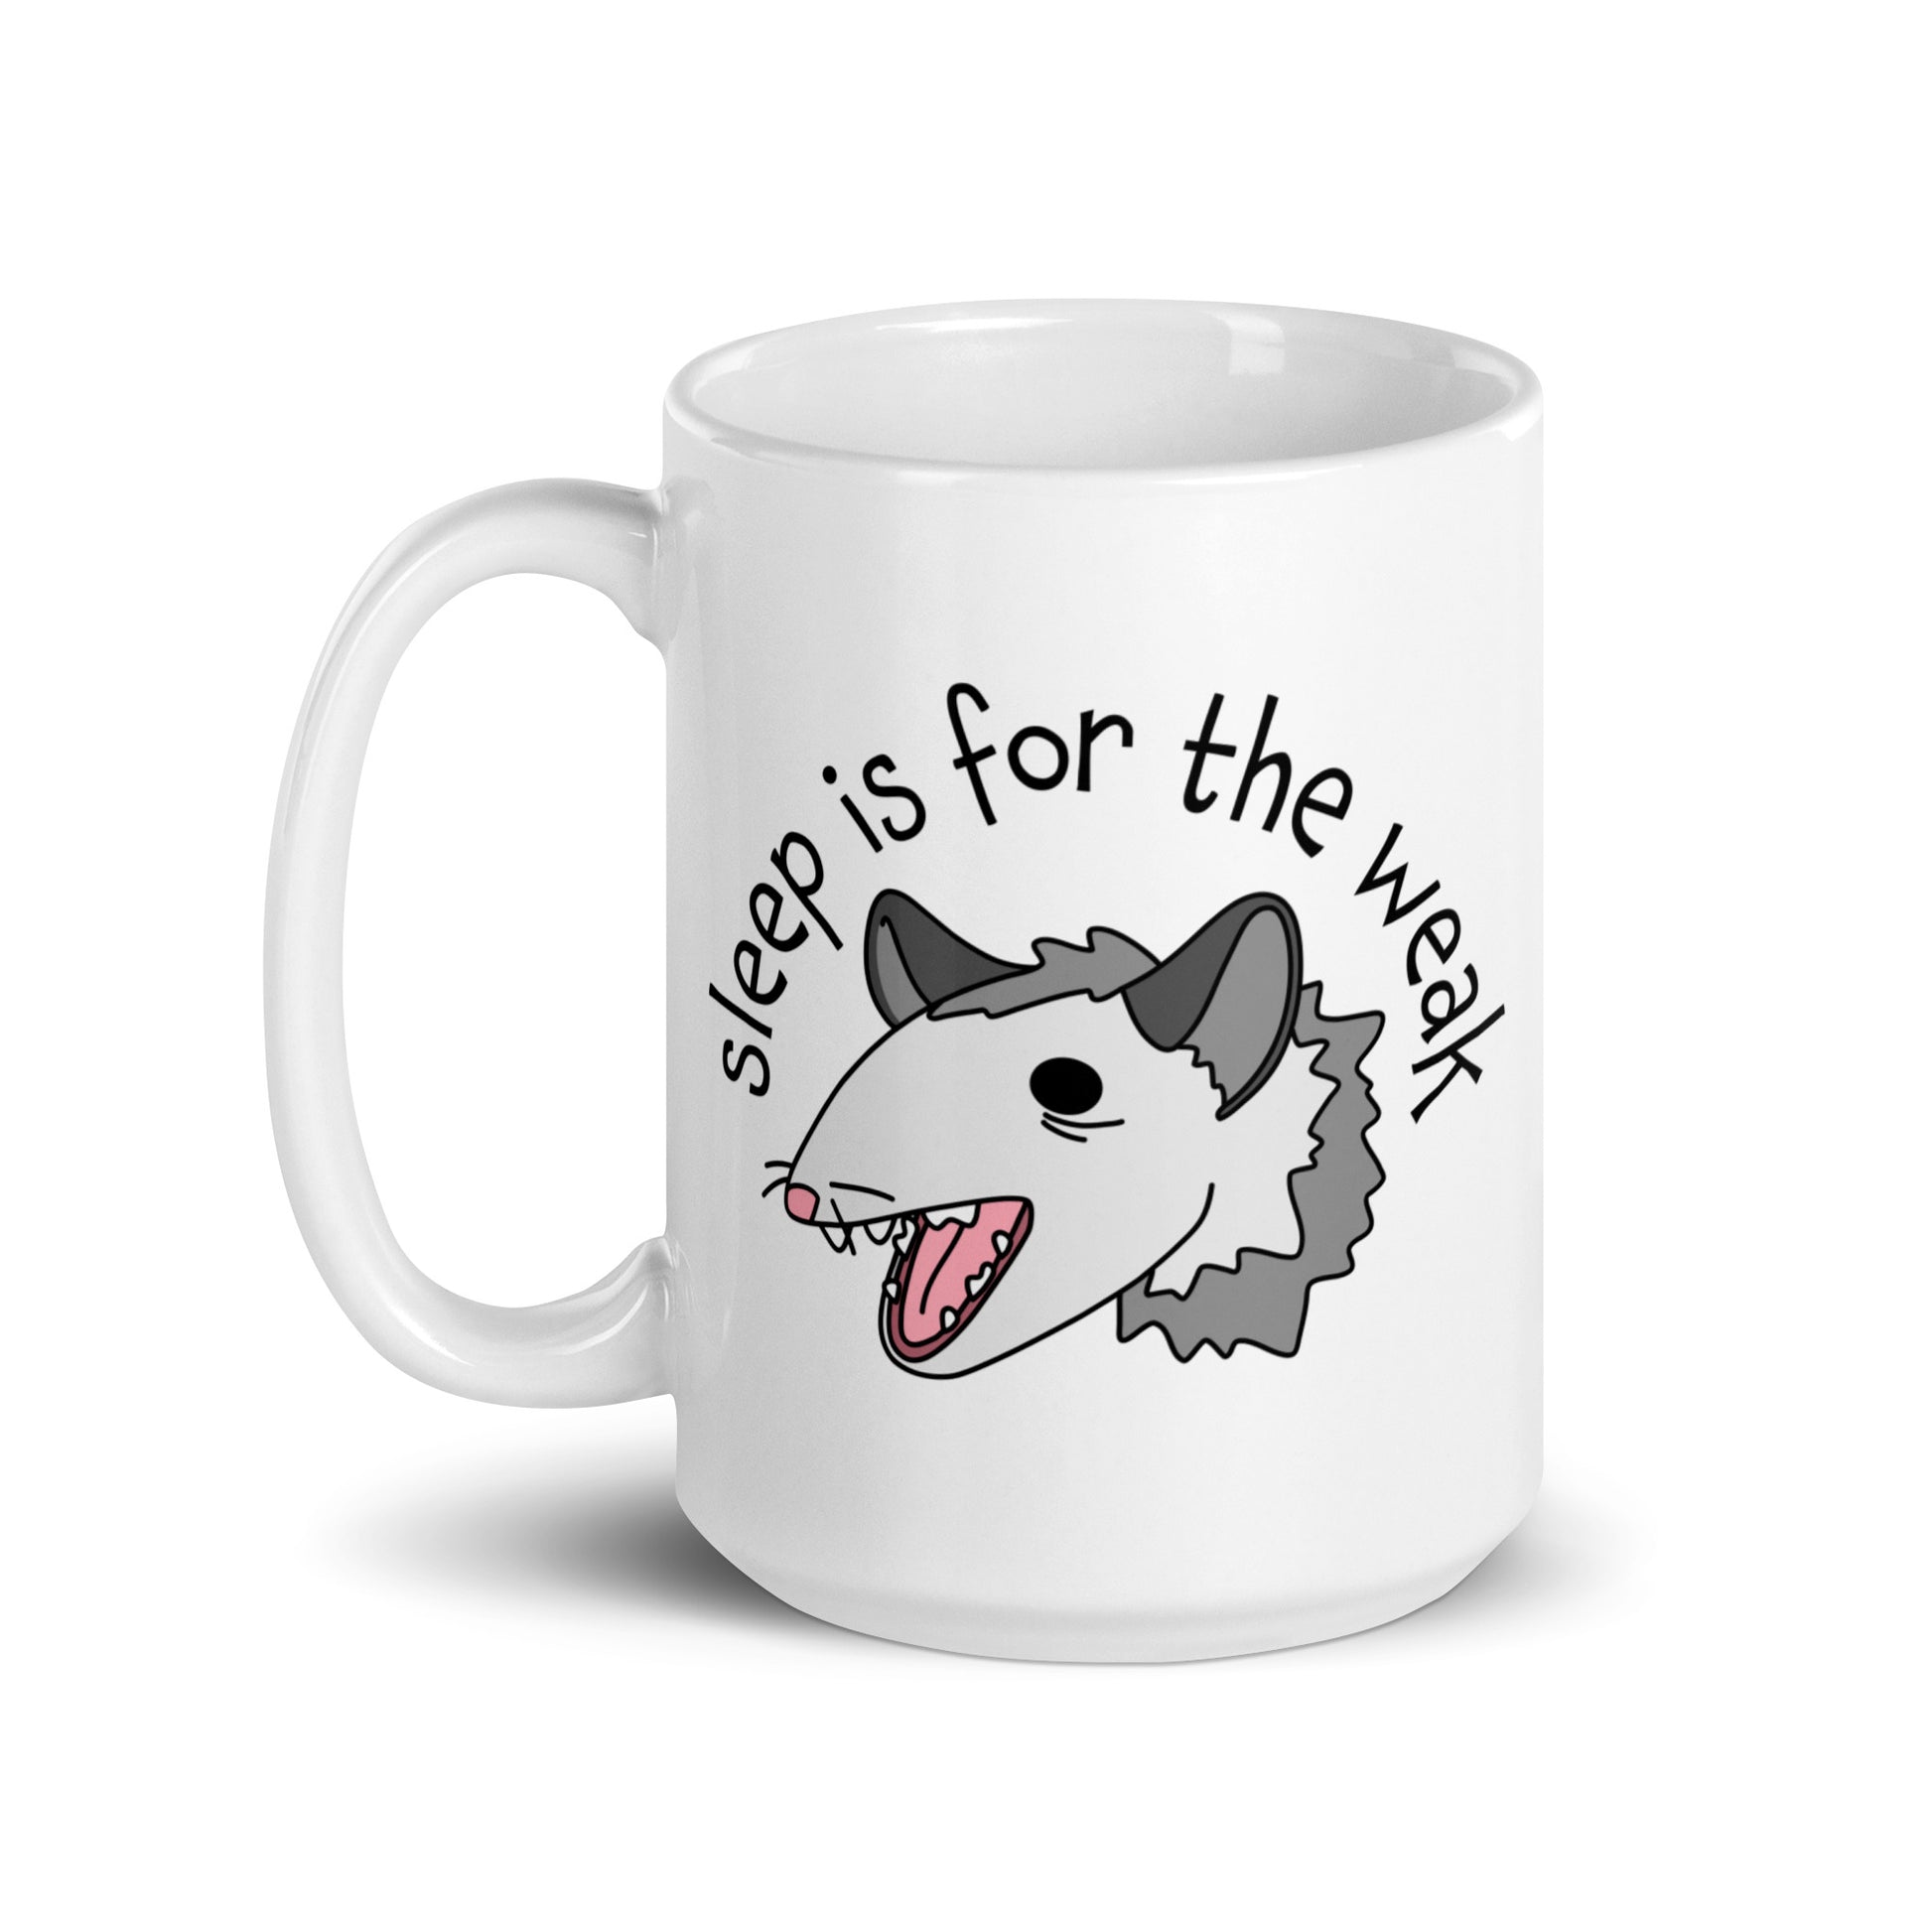 A white 15 ounce ceramic coffee mug featuring an illustration of an opossum with its mouth open, as if it was yelling. Text alongside the opossum reads "sleep is for the weak"